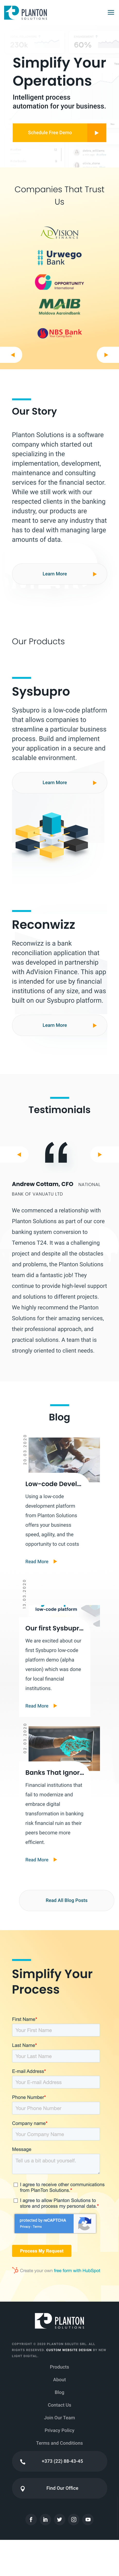 Planton Solutions Home Page Mobile Version